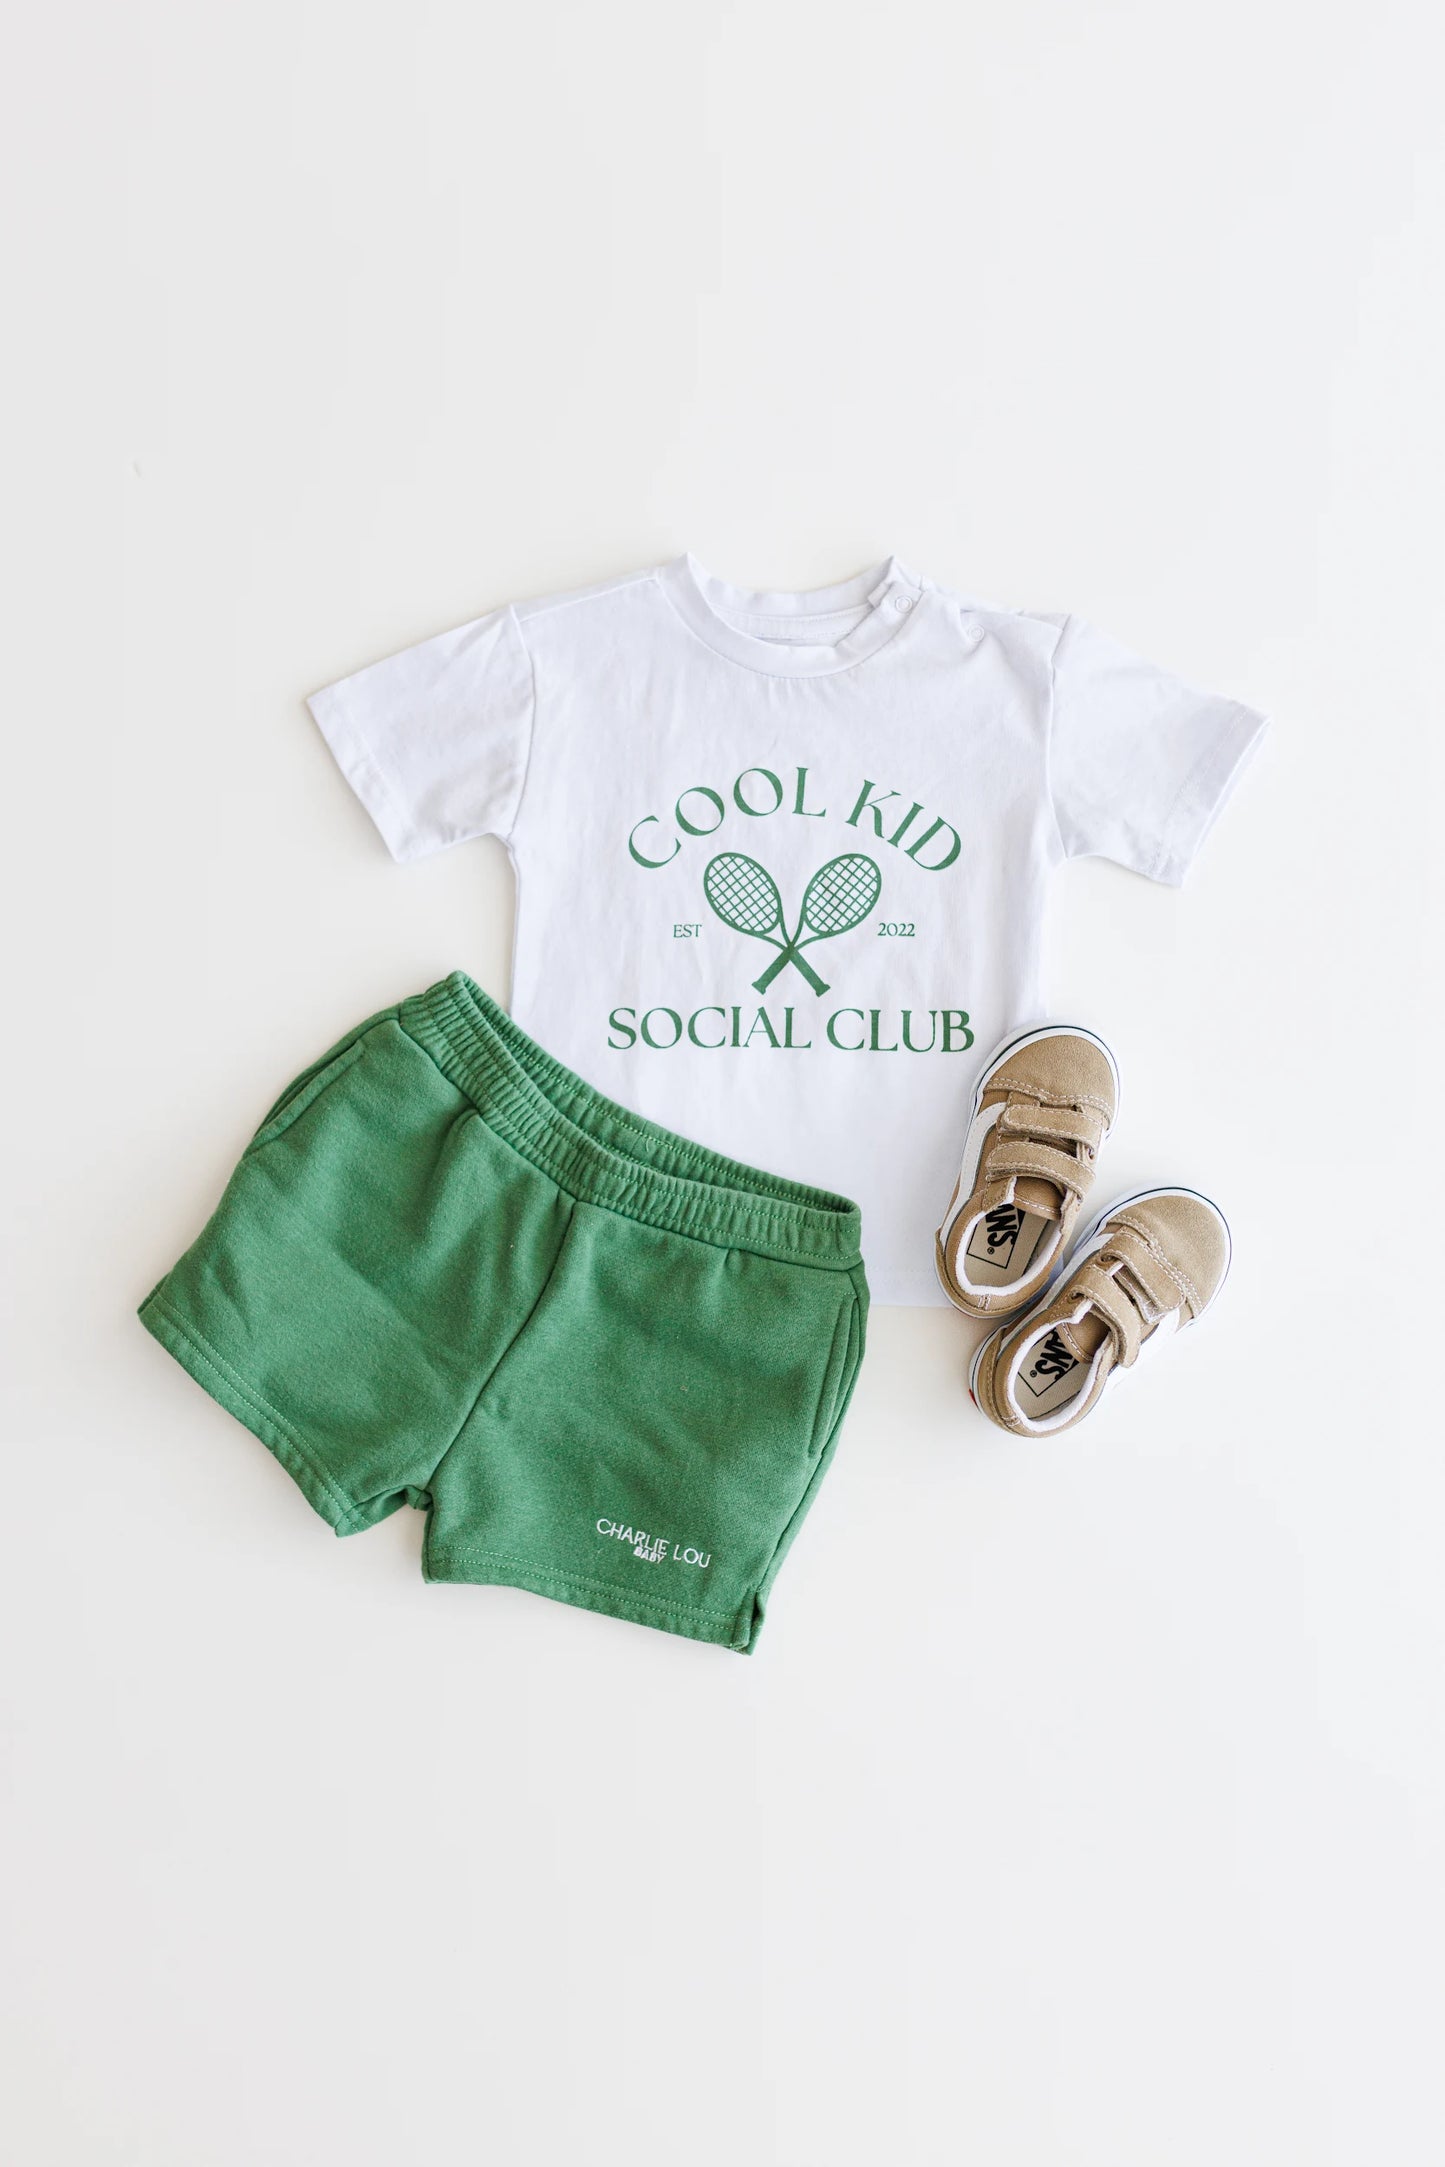 Gender neutral athletic green sports shorts for baby and toddler boys and girls.